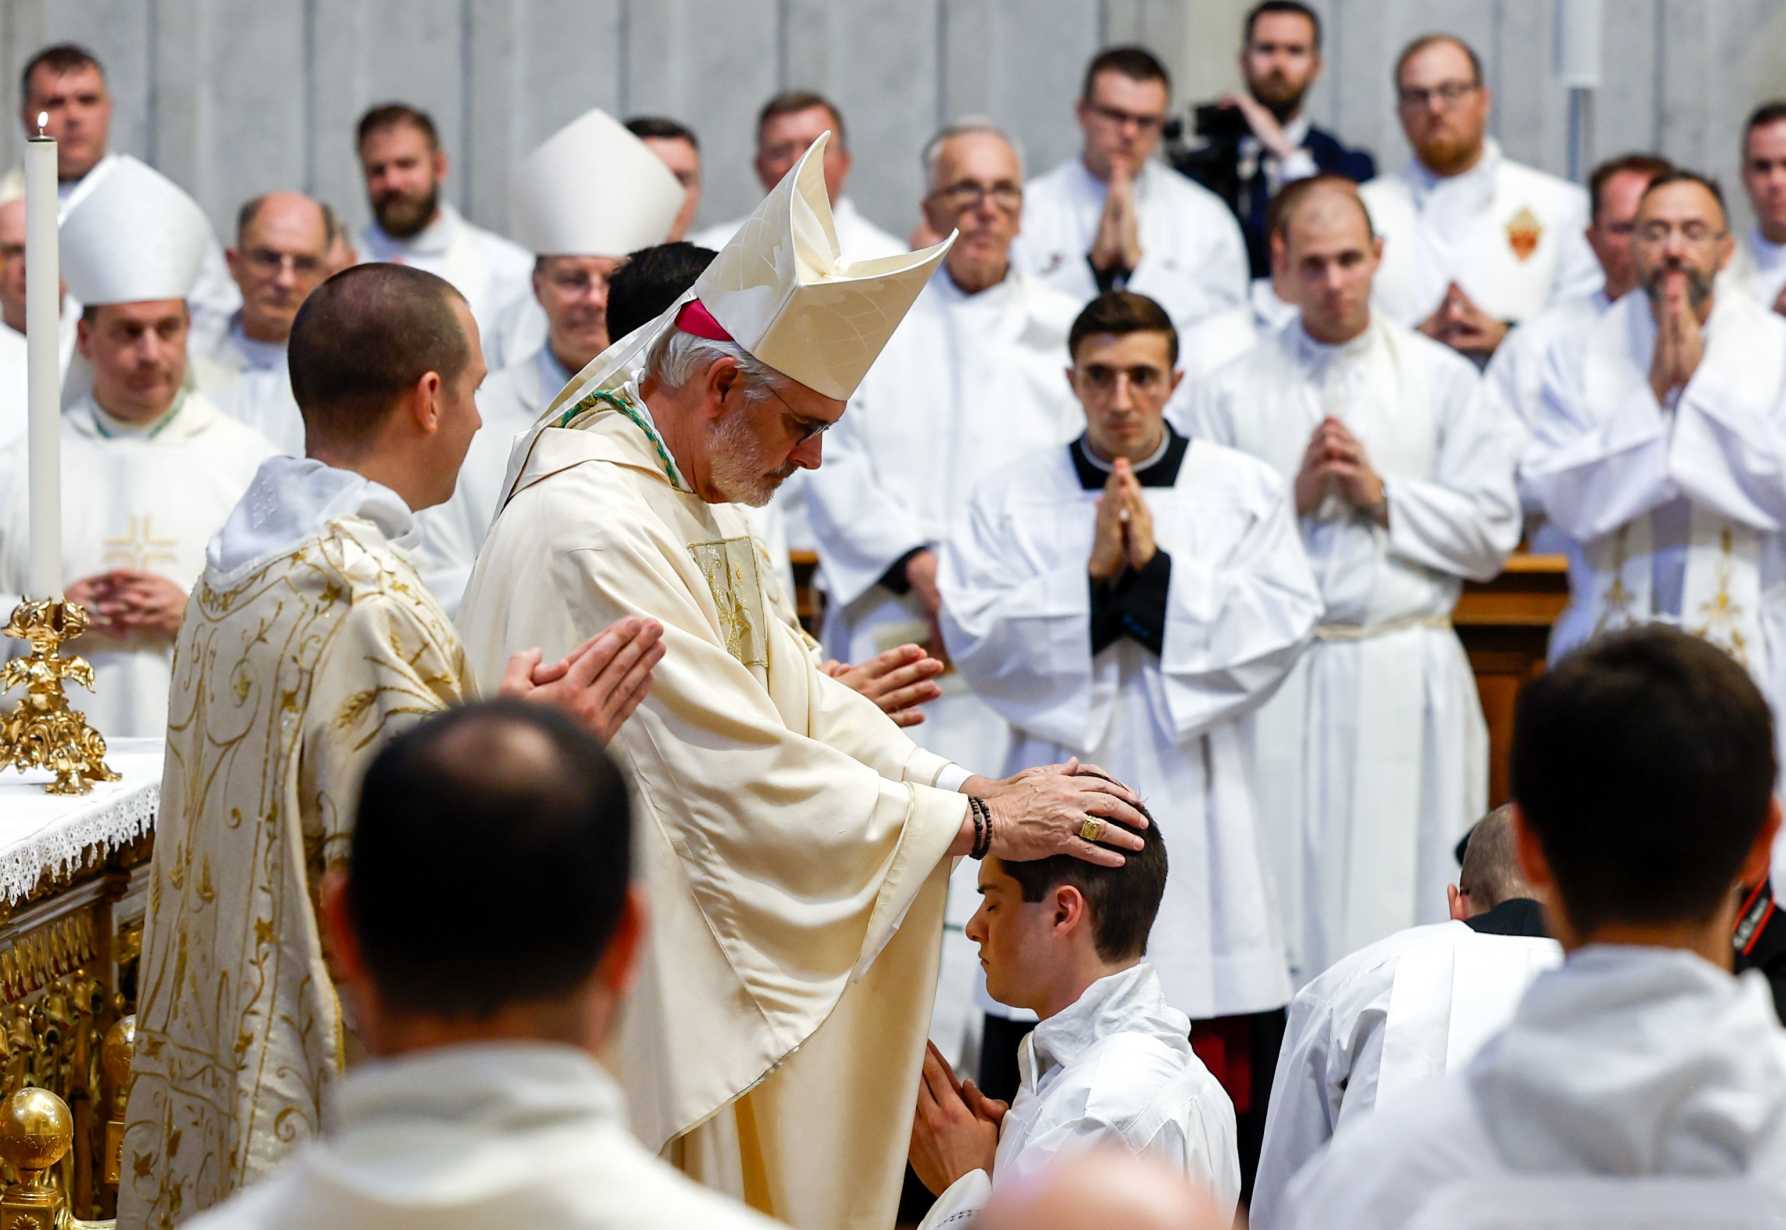 18 U.S. seminarians ordained deacons in St. Peter's Basilica